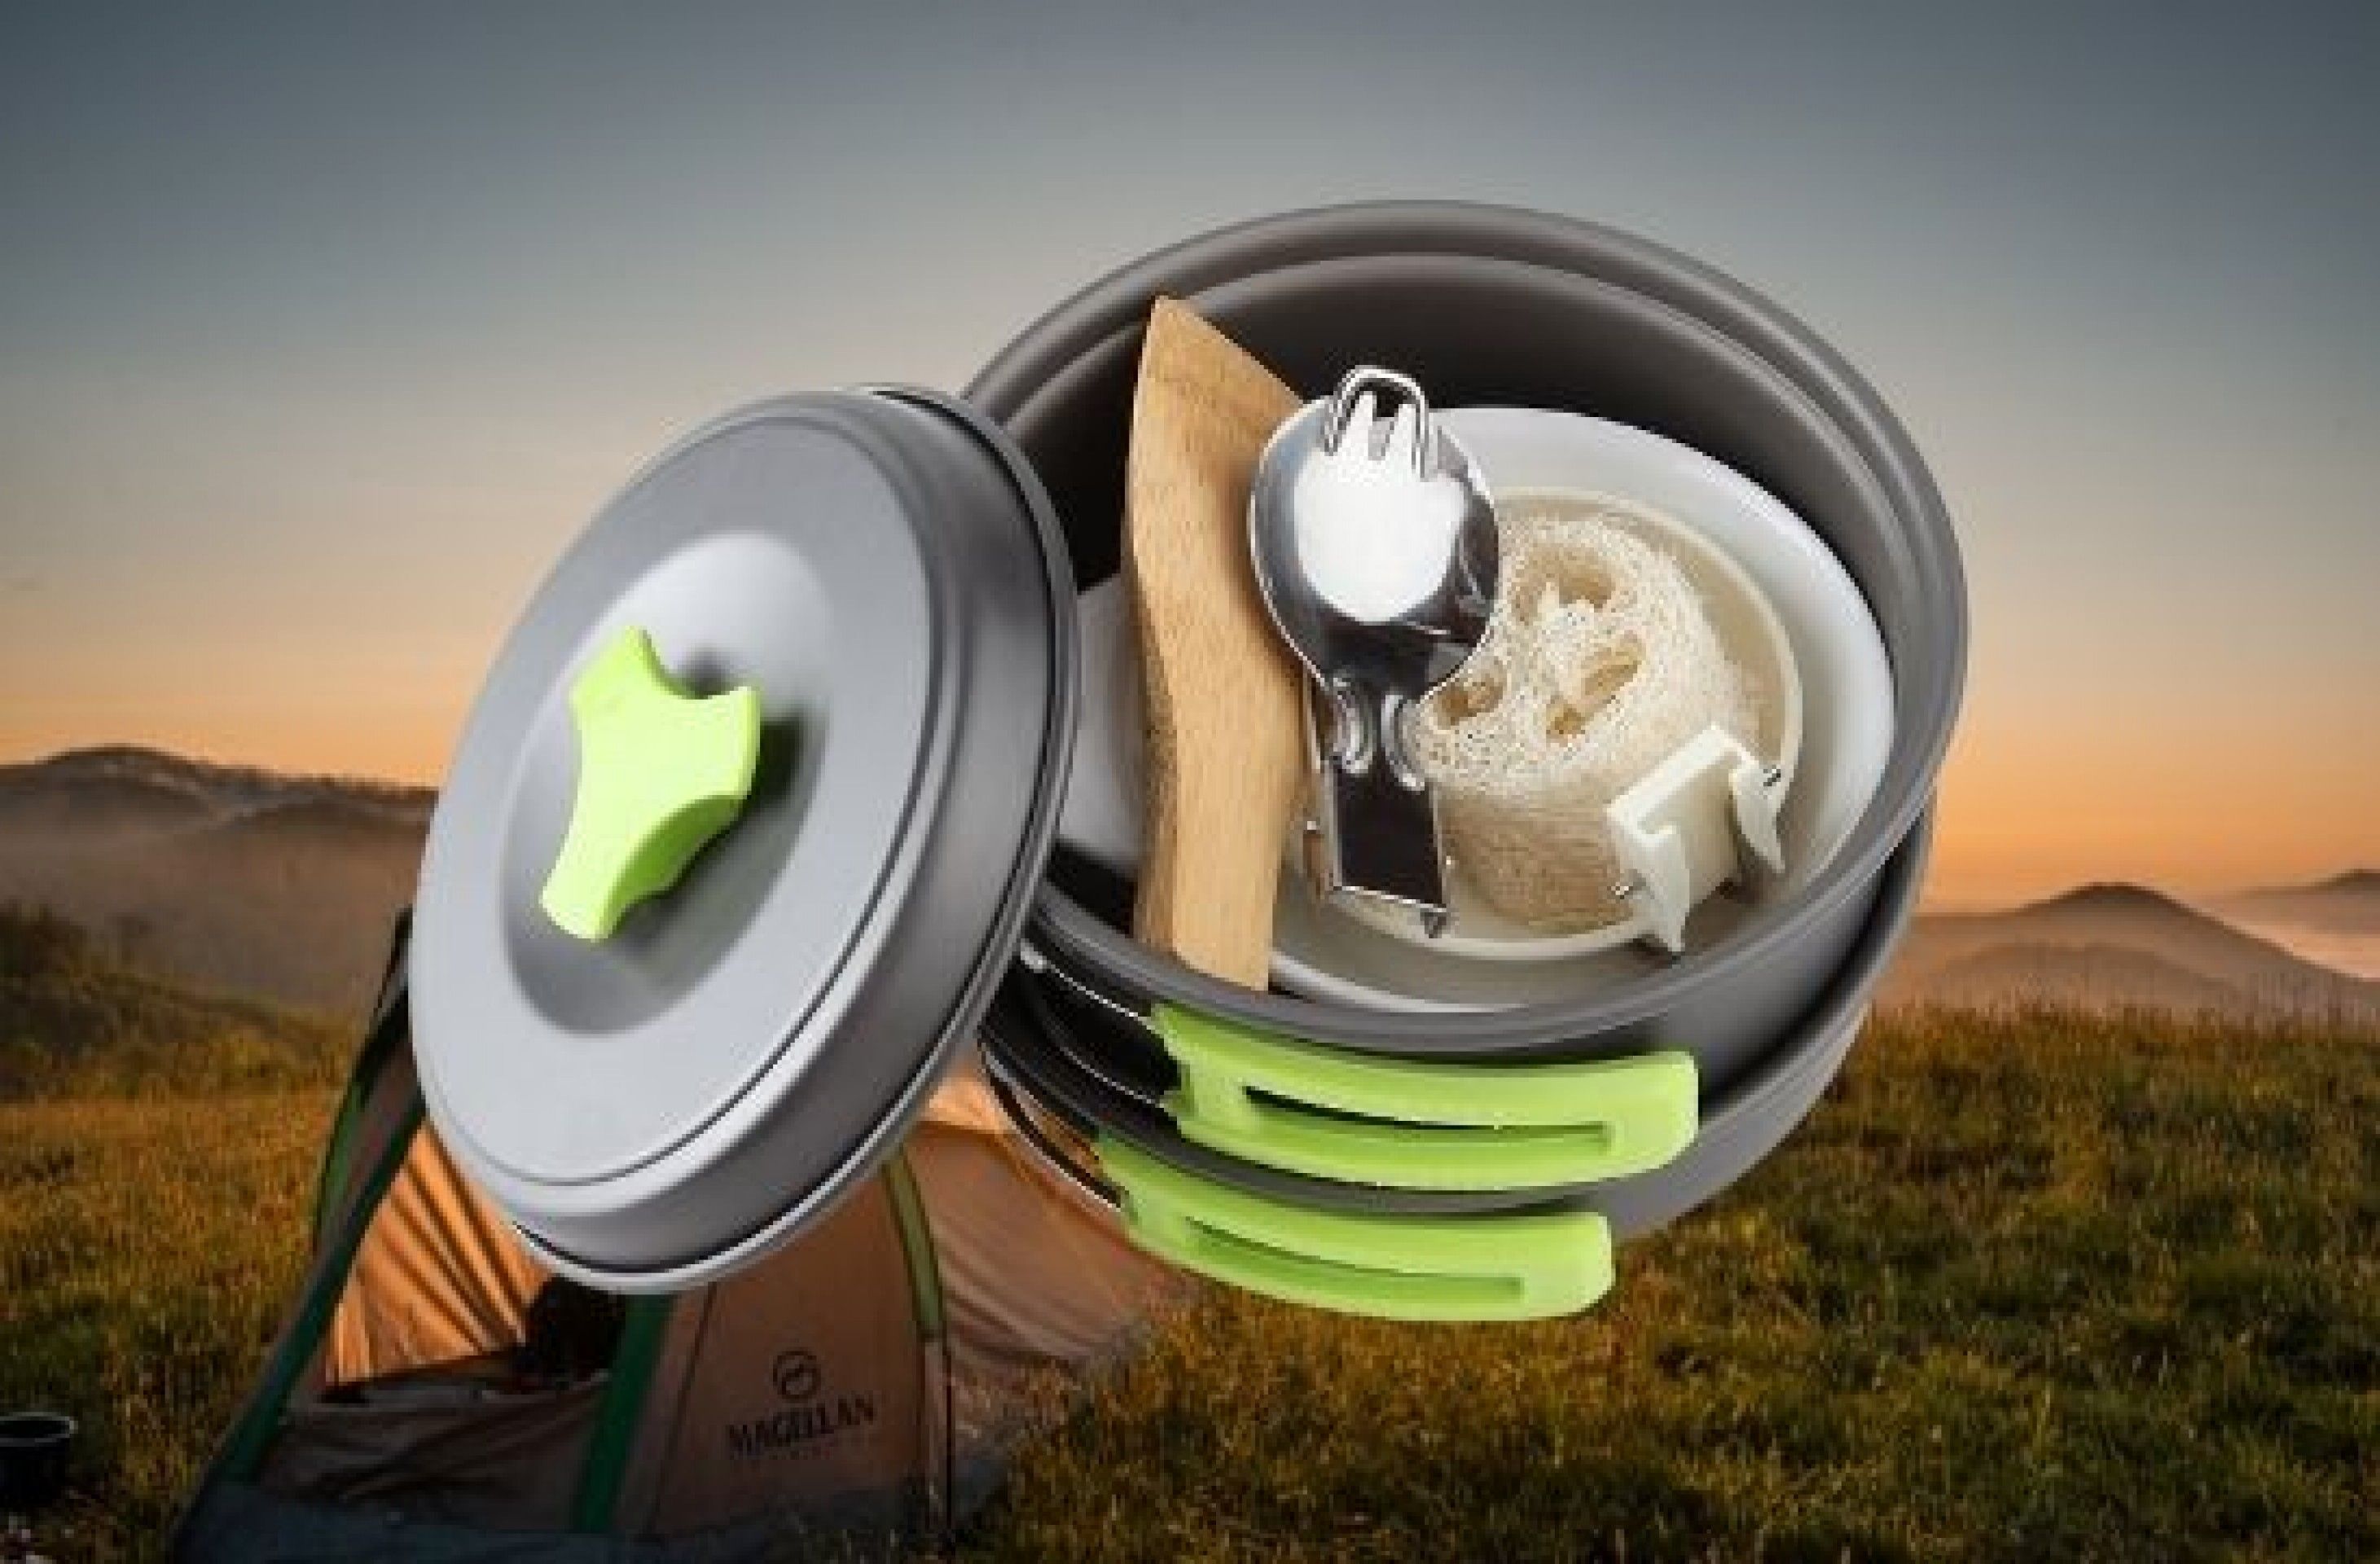 MalloMe Camping Cookware Mess Kit Review